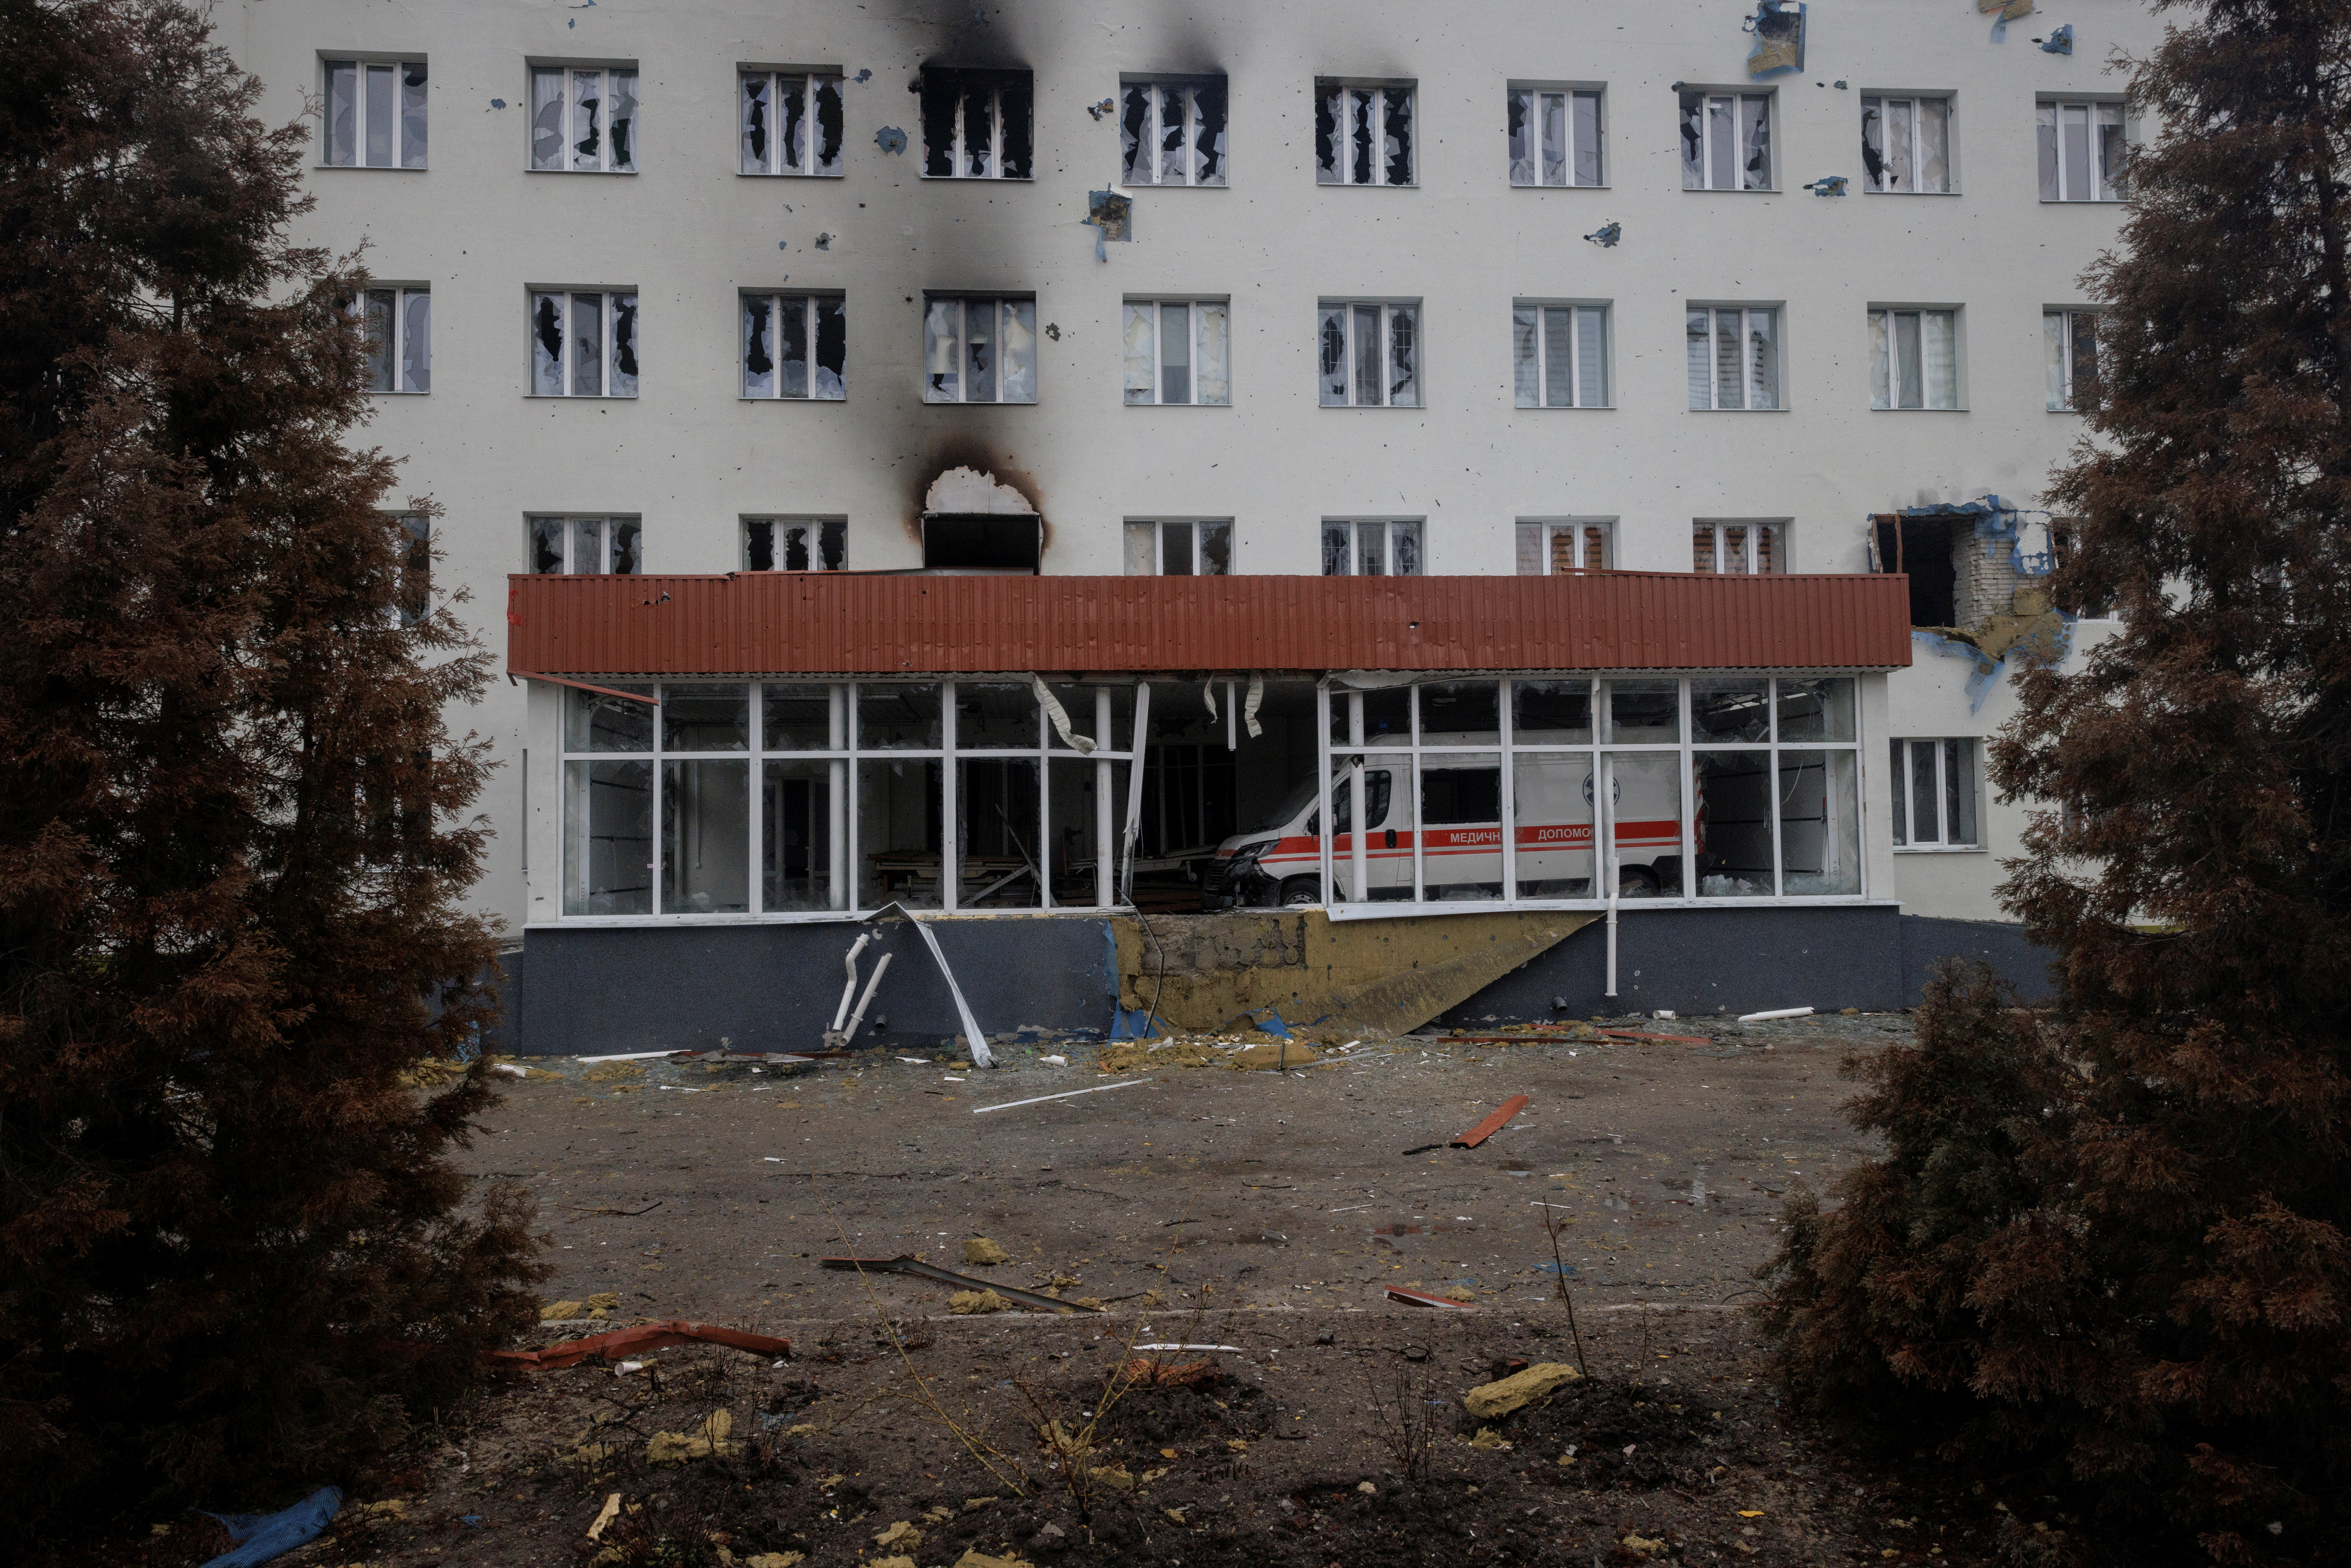 The damaged facade of a hospital is seen in Trostyanets, which staff said Russian troops fired at with tanks during their occupation of the town